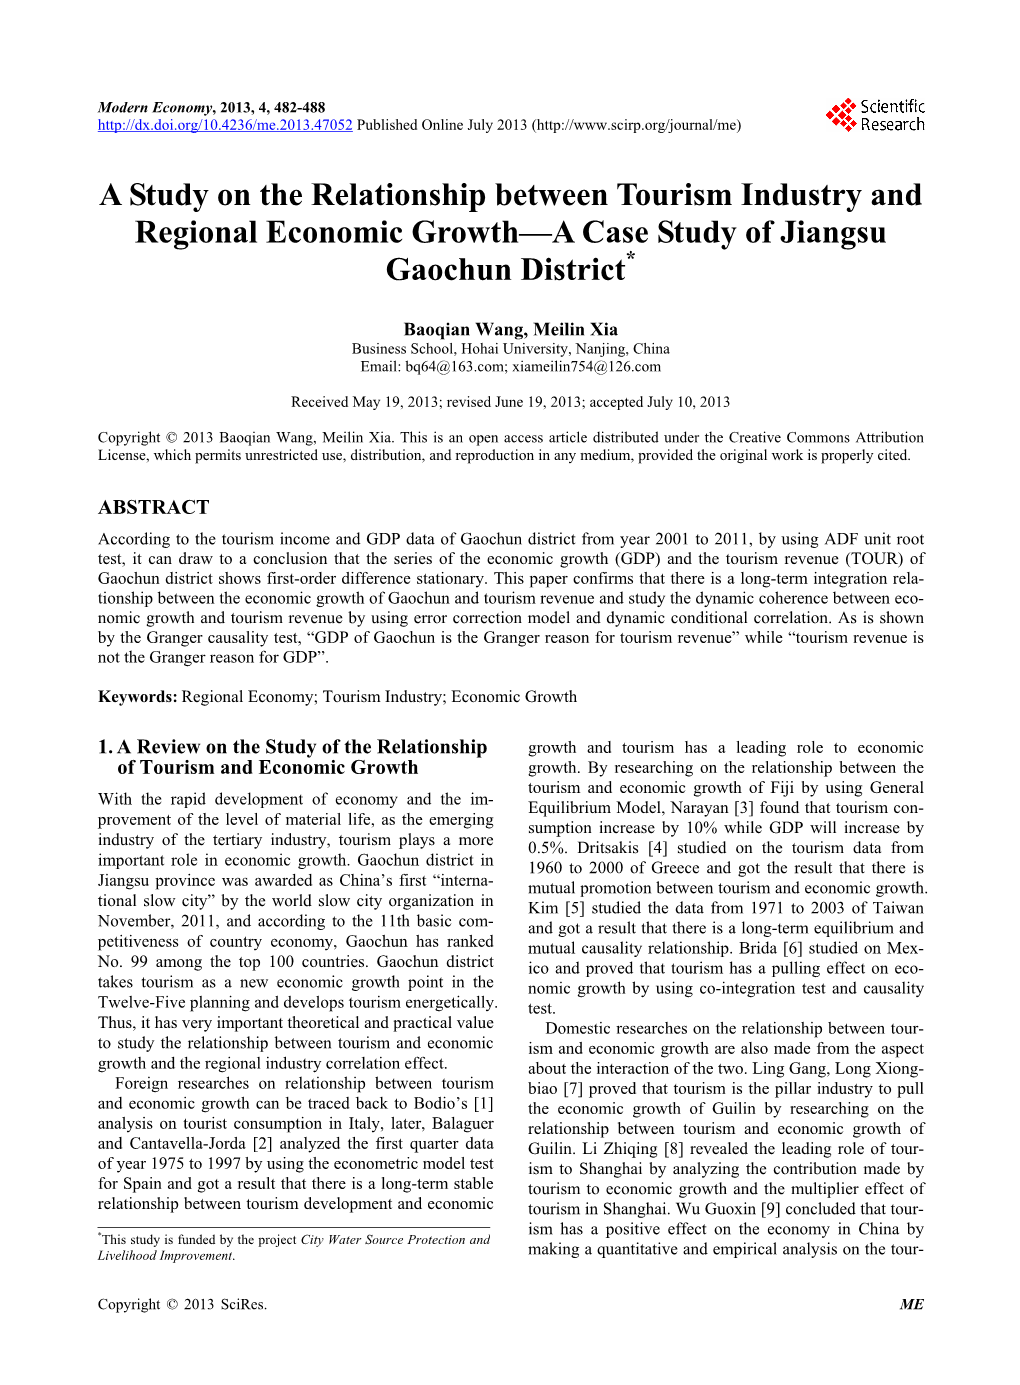 A Study on the Relationship Between Tourism Industry and Regional Economic Growth—A Case Study of Jiangsu Gaochun District*